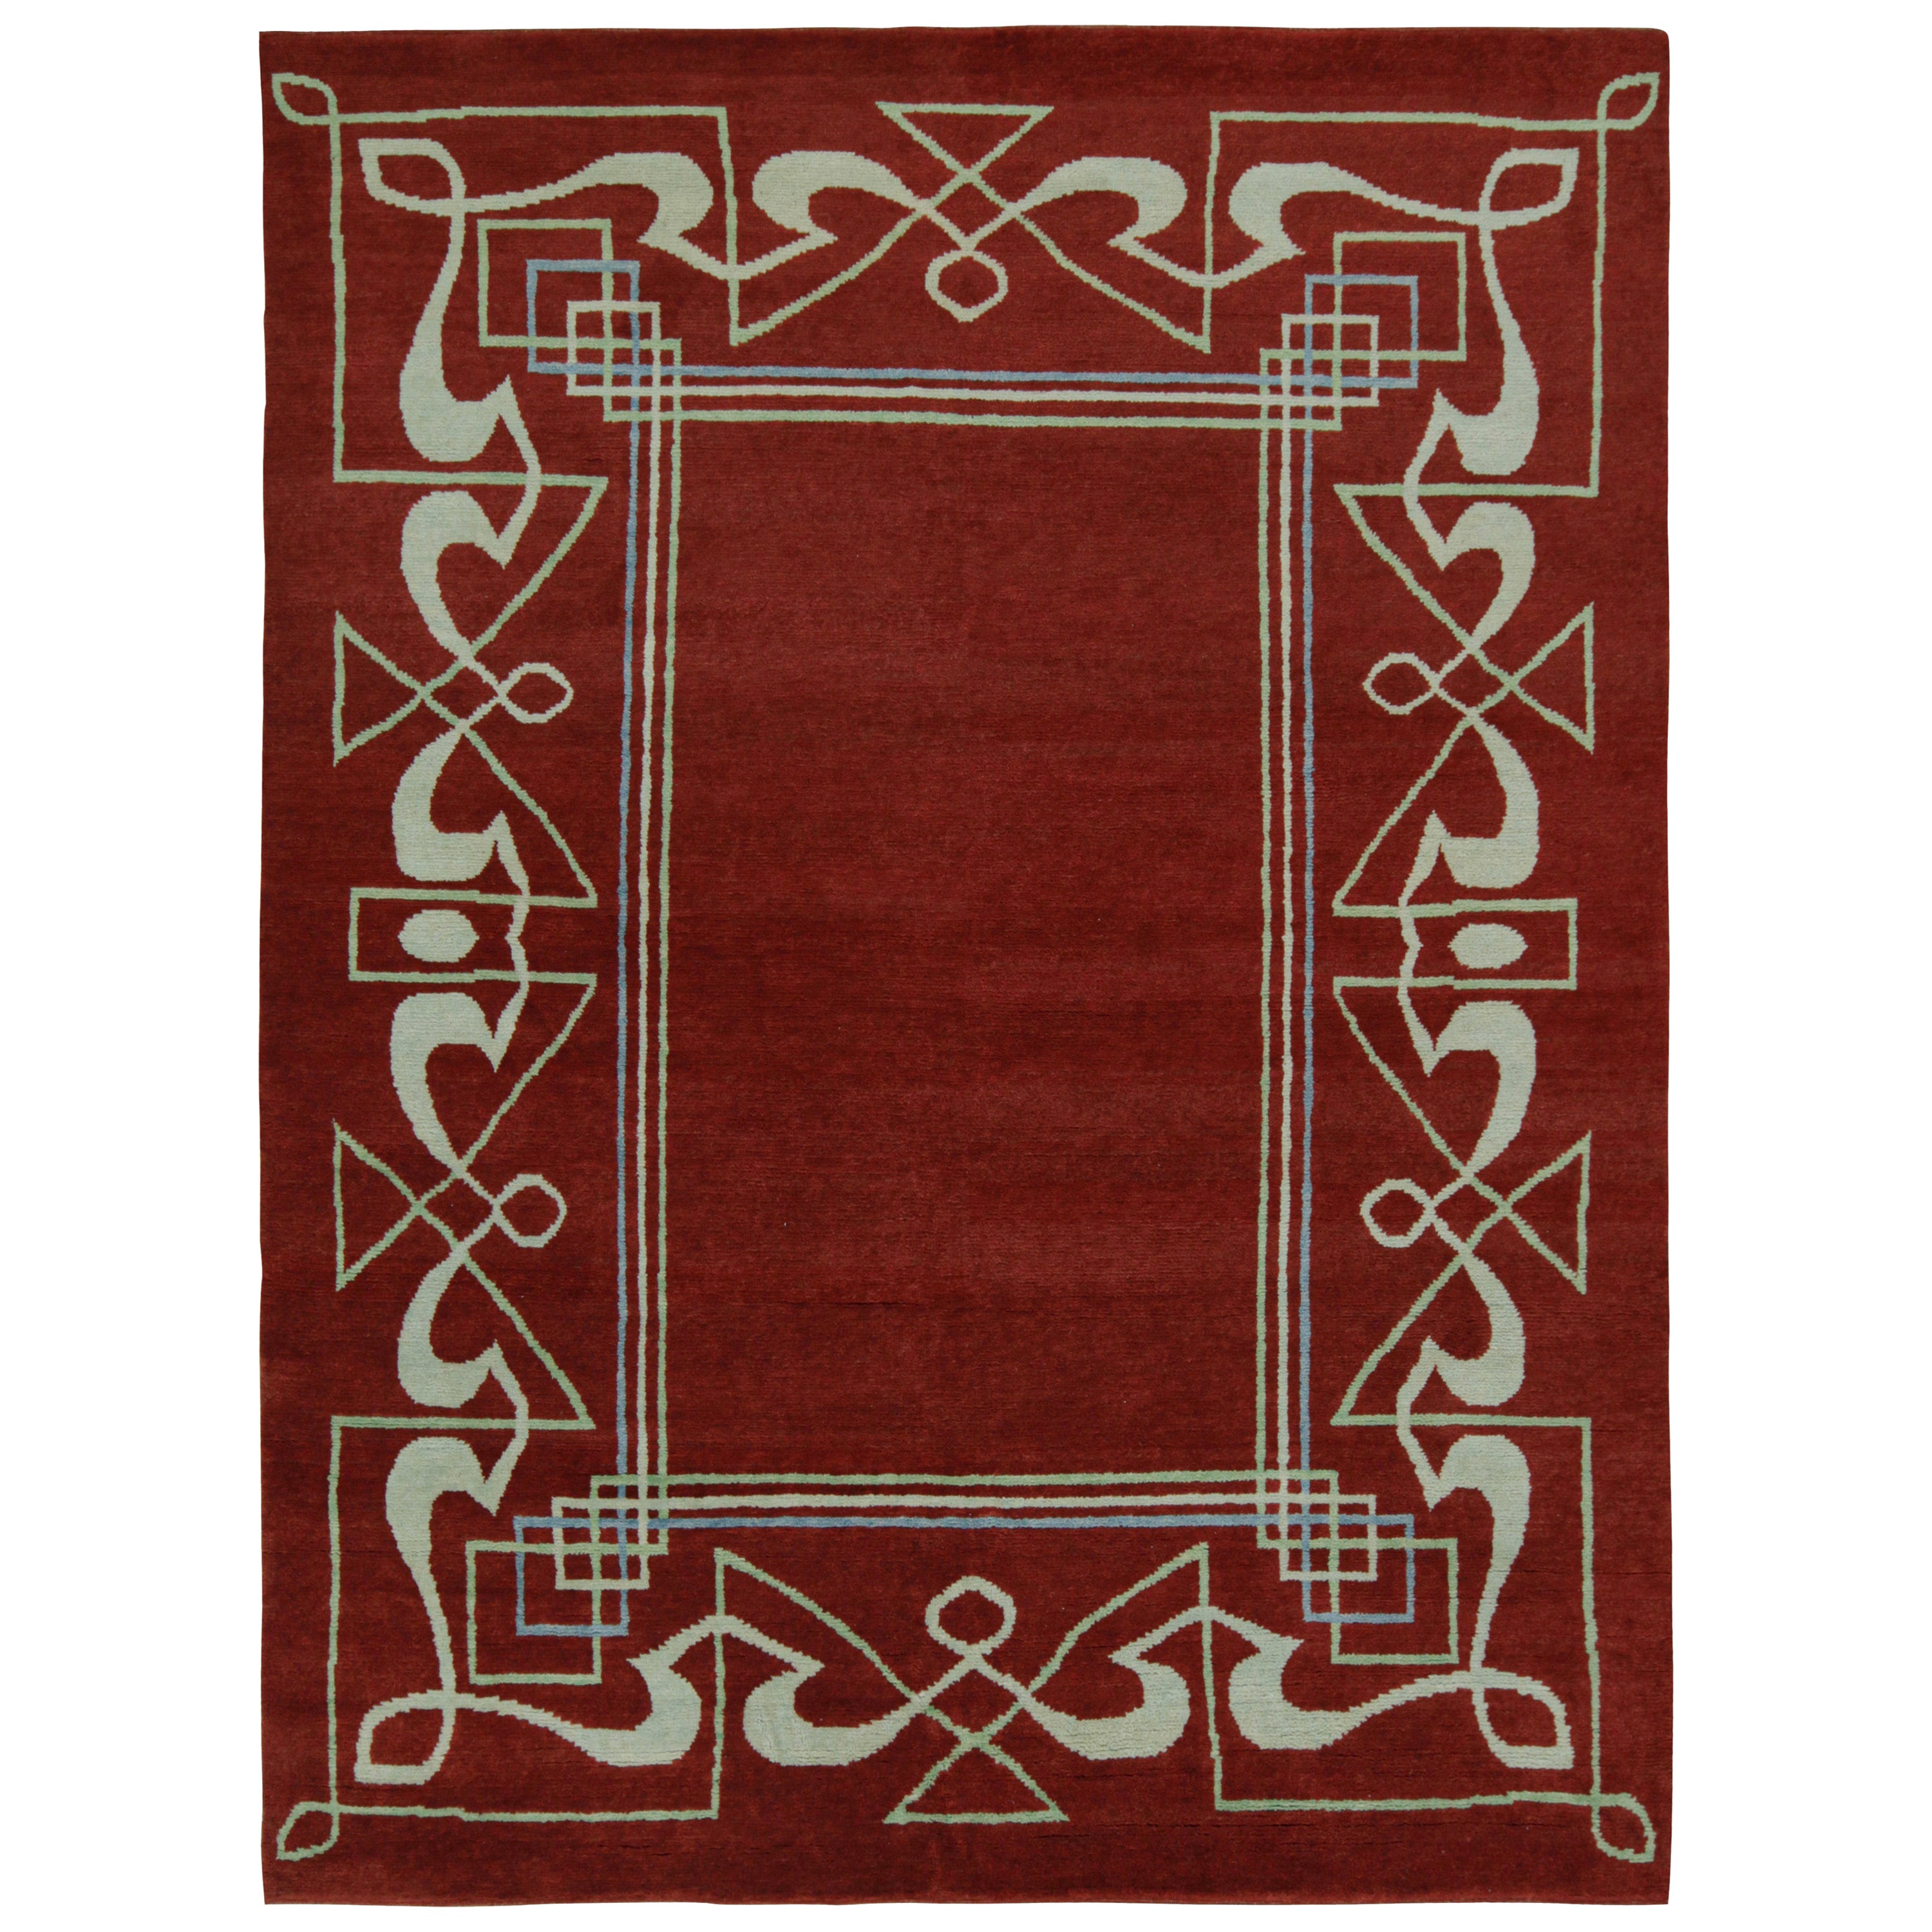 Rug & Kilim's French Style Art Deco Rug in Red & White Geometric Patterns (Rug & Kilim's French Style Art Deco Rug in Red & White Geometric Patterns (Rug & Kilim's French Style Art Deco Rug in Red & White Geometric Patterns (Rug & Kilim's French Style Art Deco Rug in Red & White Geometric Patterns))